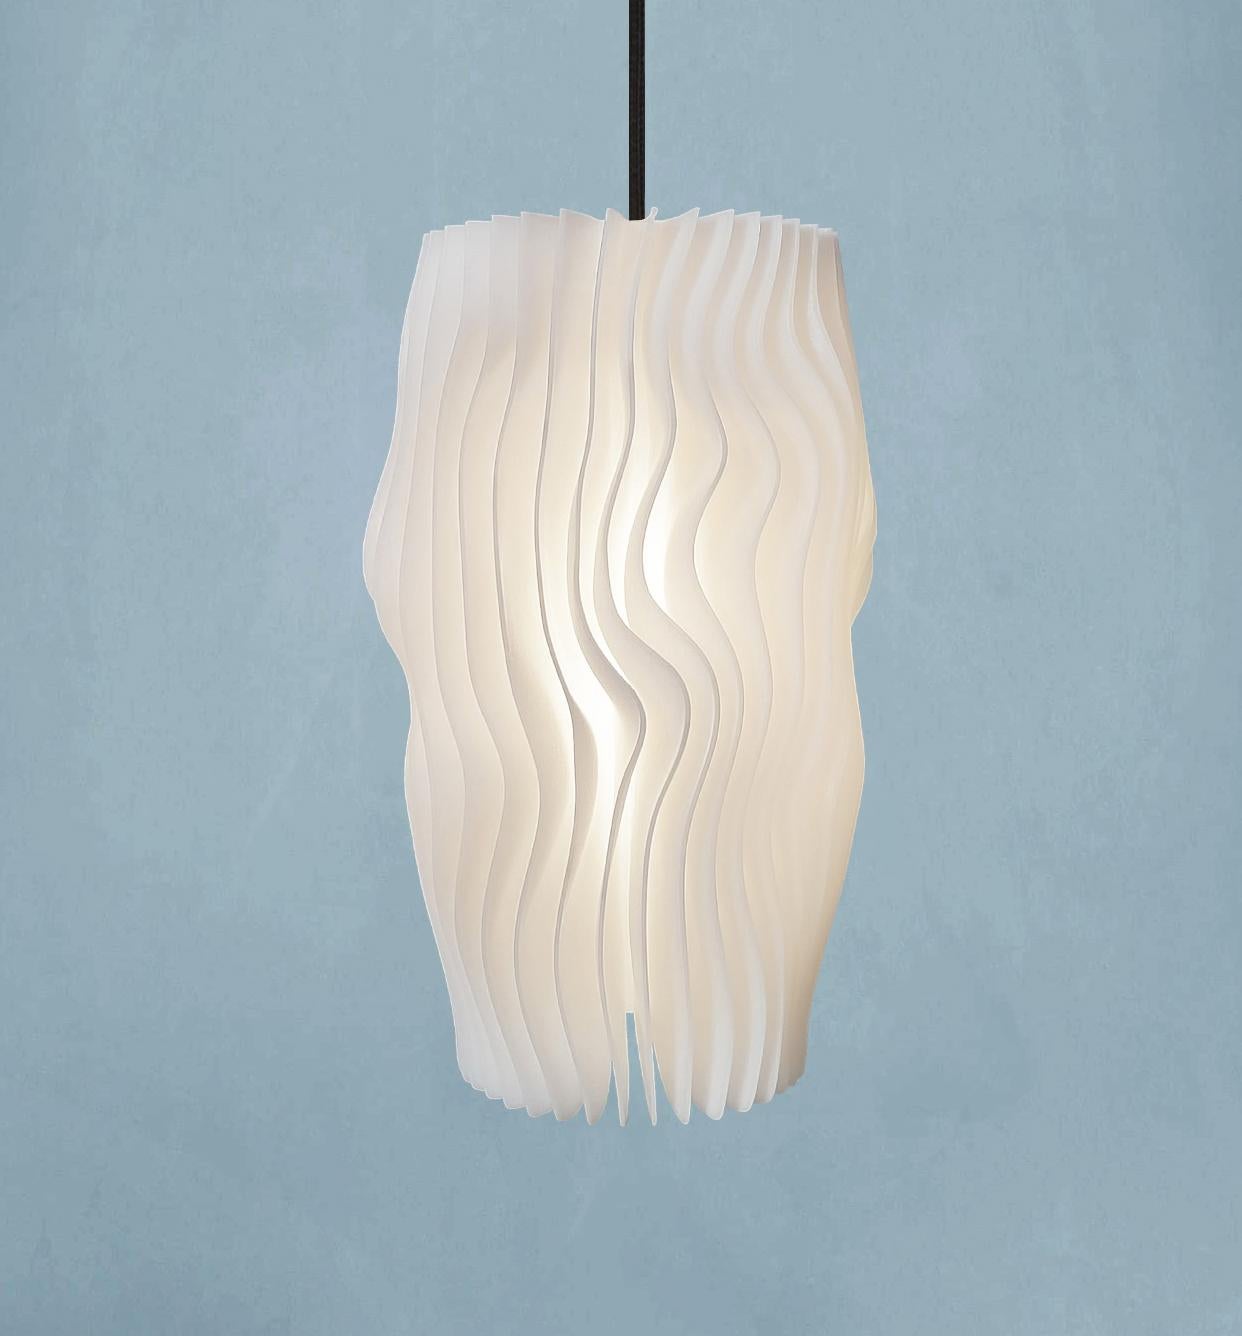 This object is a limited edition (1/330) Swiss Design Pendant lamp from the first Glacier series - inspired by the organic shape of glacial ice layers - brand new in the box with certificate and International Lifetime Warranty, several consecutively